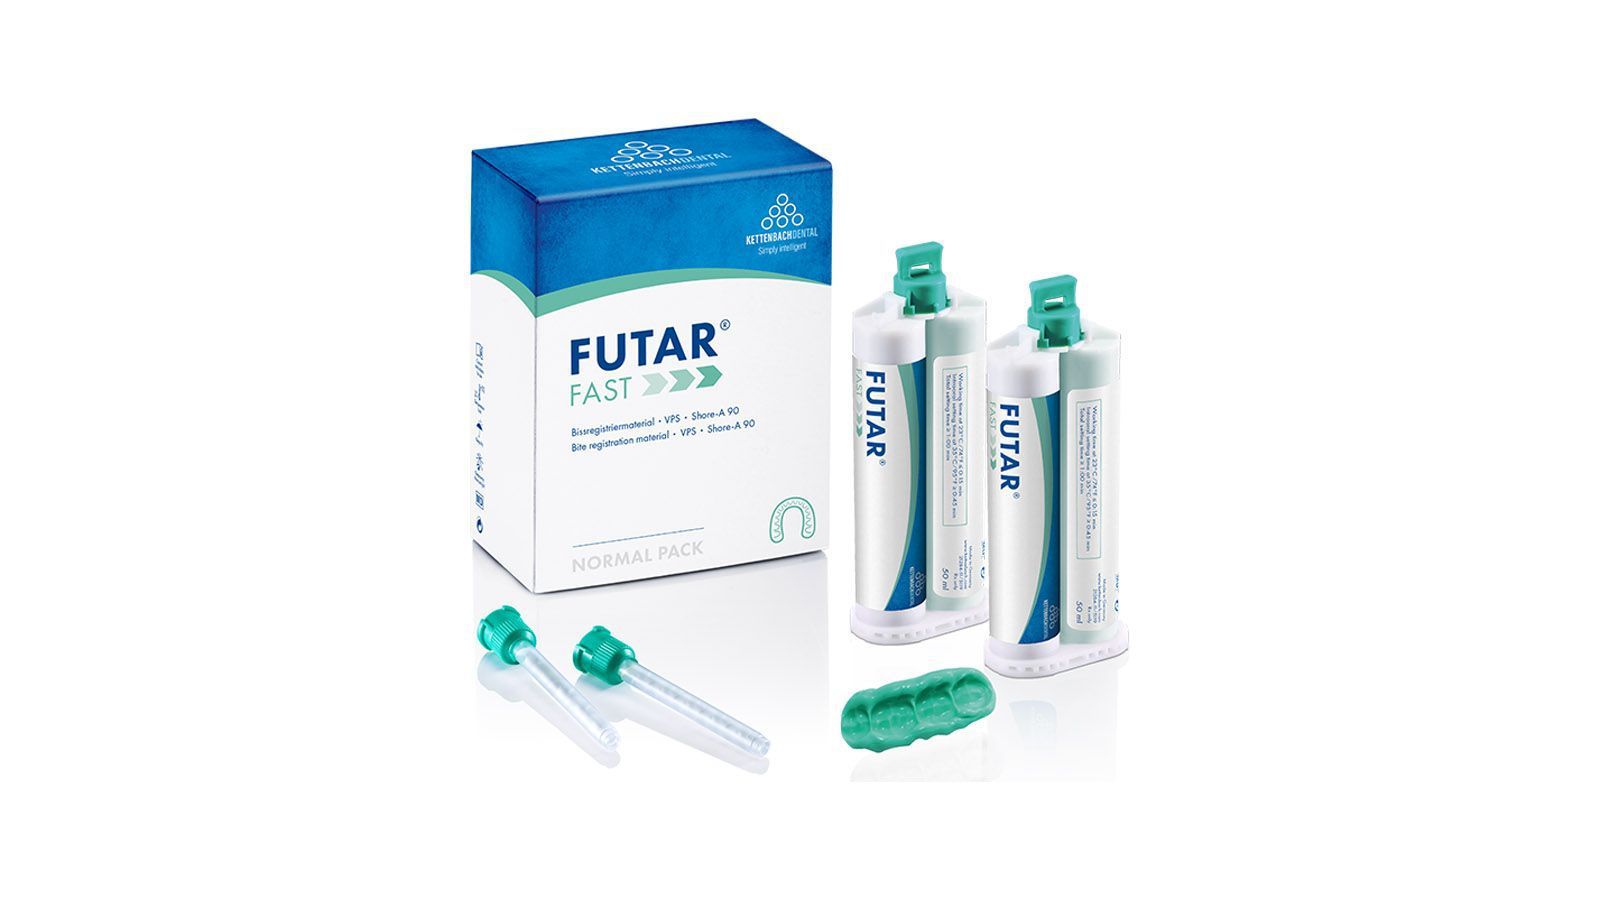 Futar Fast Normal pack 2 x 50 ml, 6 mixing tips